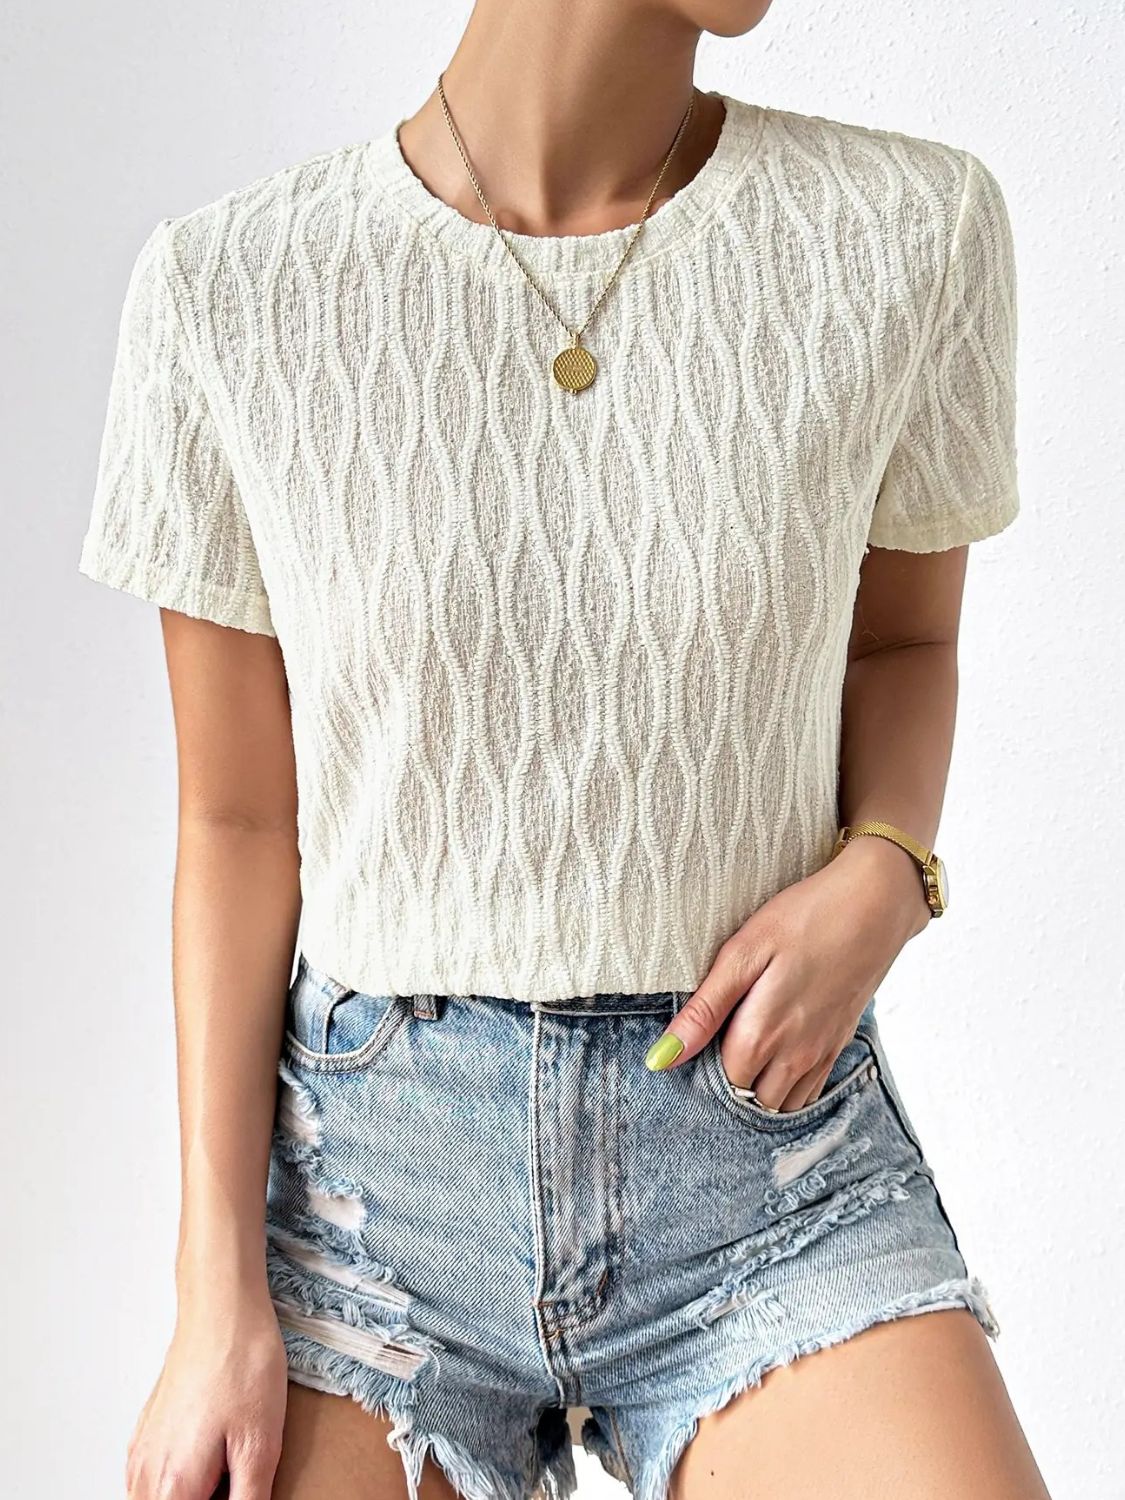 Textured Round Neck Crop Top - White / XS - Women’s Clothing & Accessories - Shirts & Tops - 1 - 2024